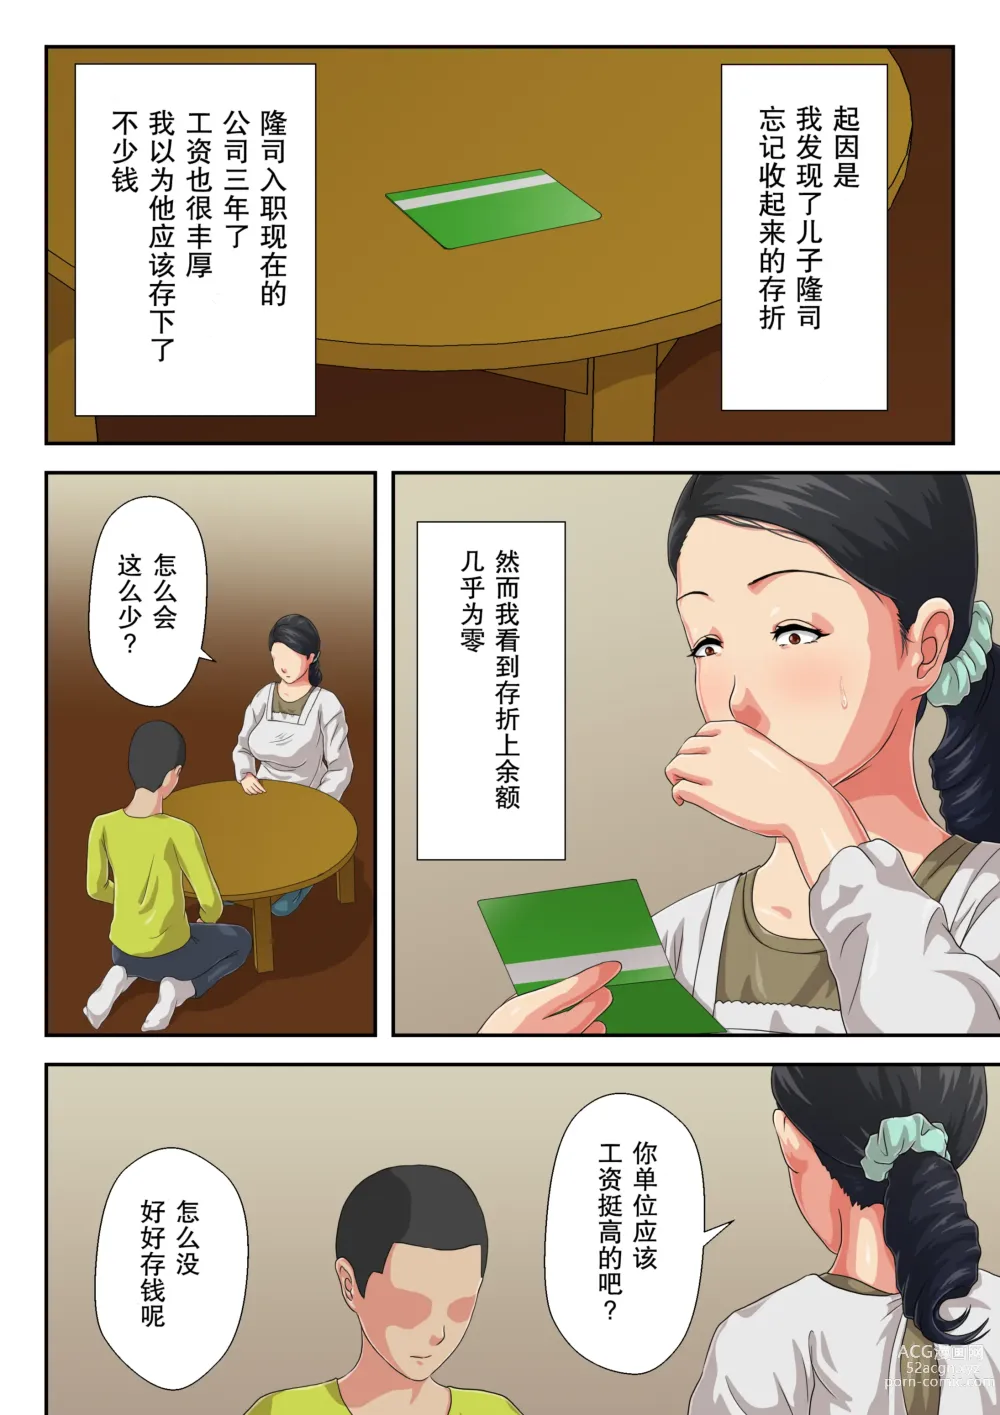 Page 3 of doujinshi 用妈妈发泄吧